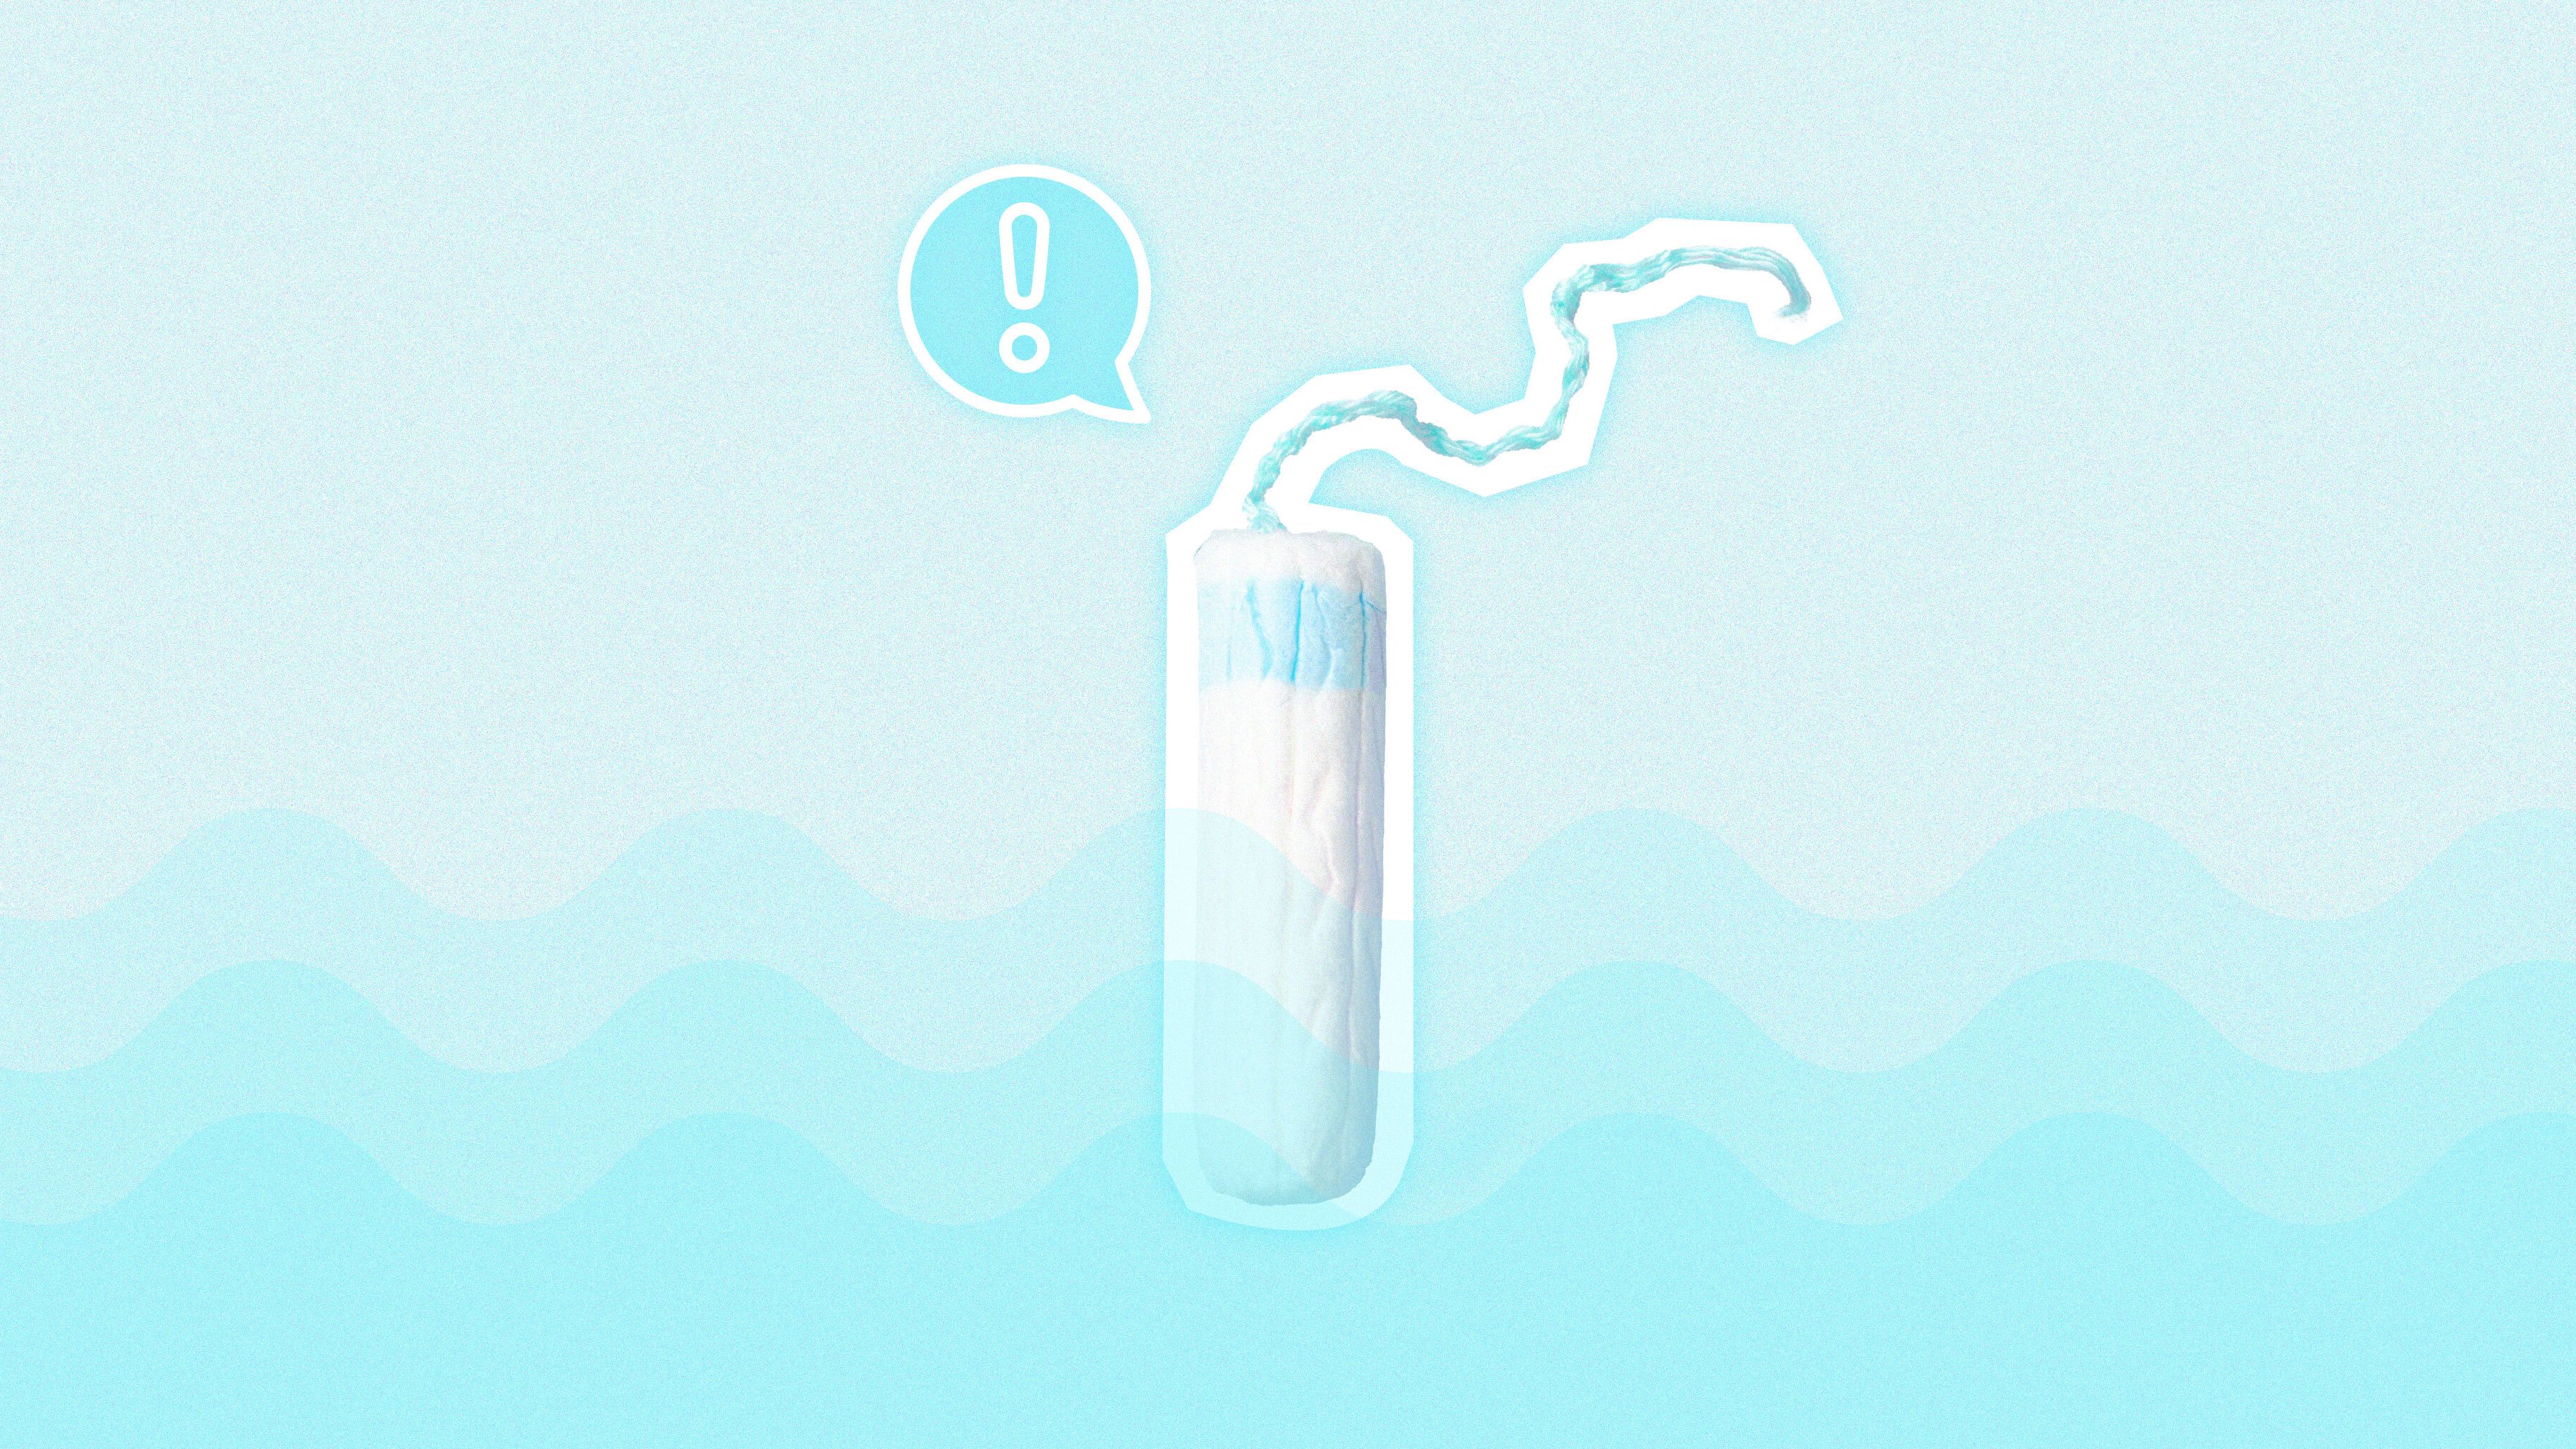 Glow-in-the-dark tampons detect polluted water, Science